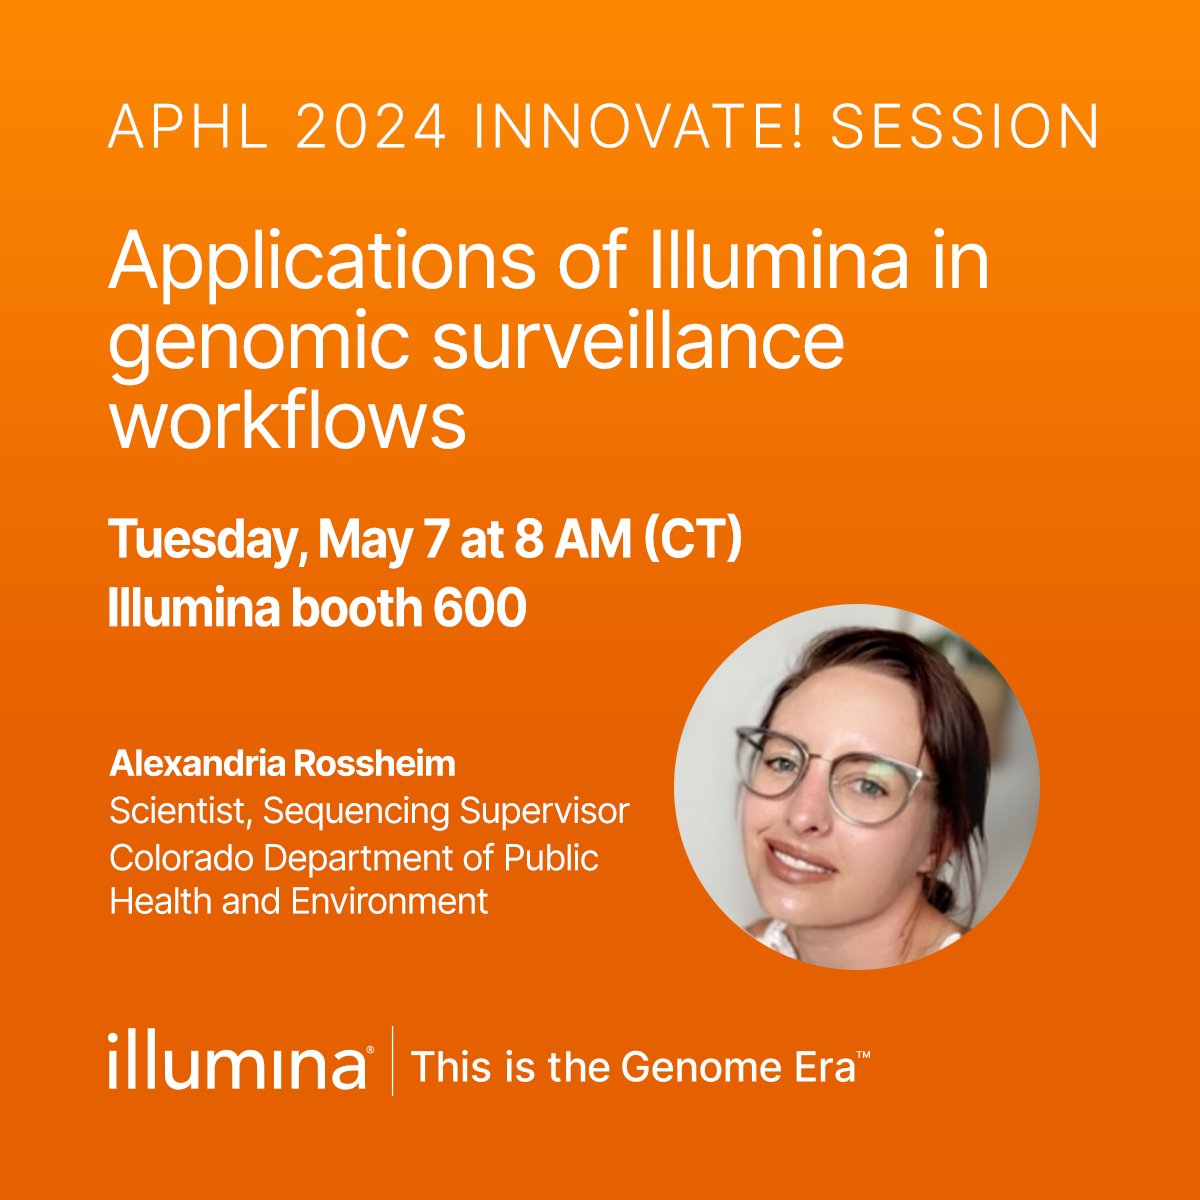 Discover the impact of advanced genomic workflows on pathogen identification and surveillance at #APHL. Visit us next week at Illumina booth 600 to learn more about advancing public health with next-generation sequencing solutions or join us at our Innovate! session.